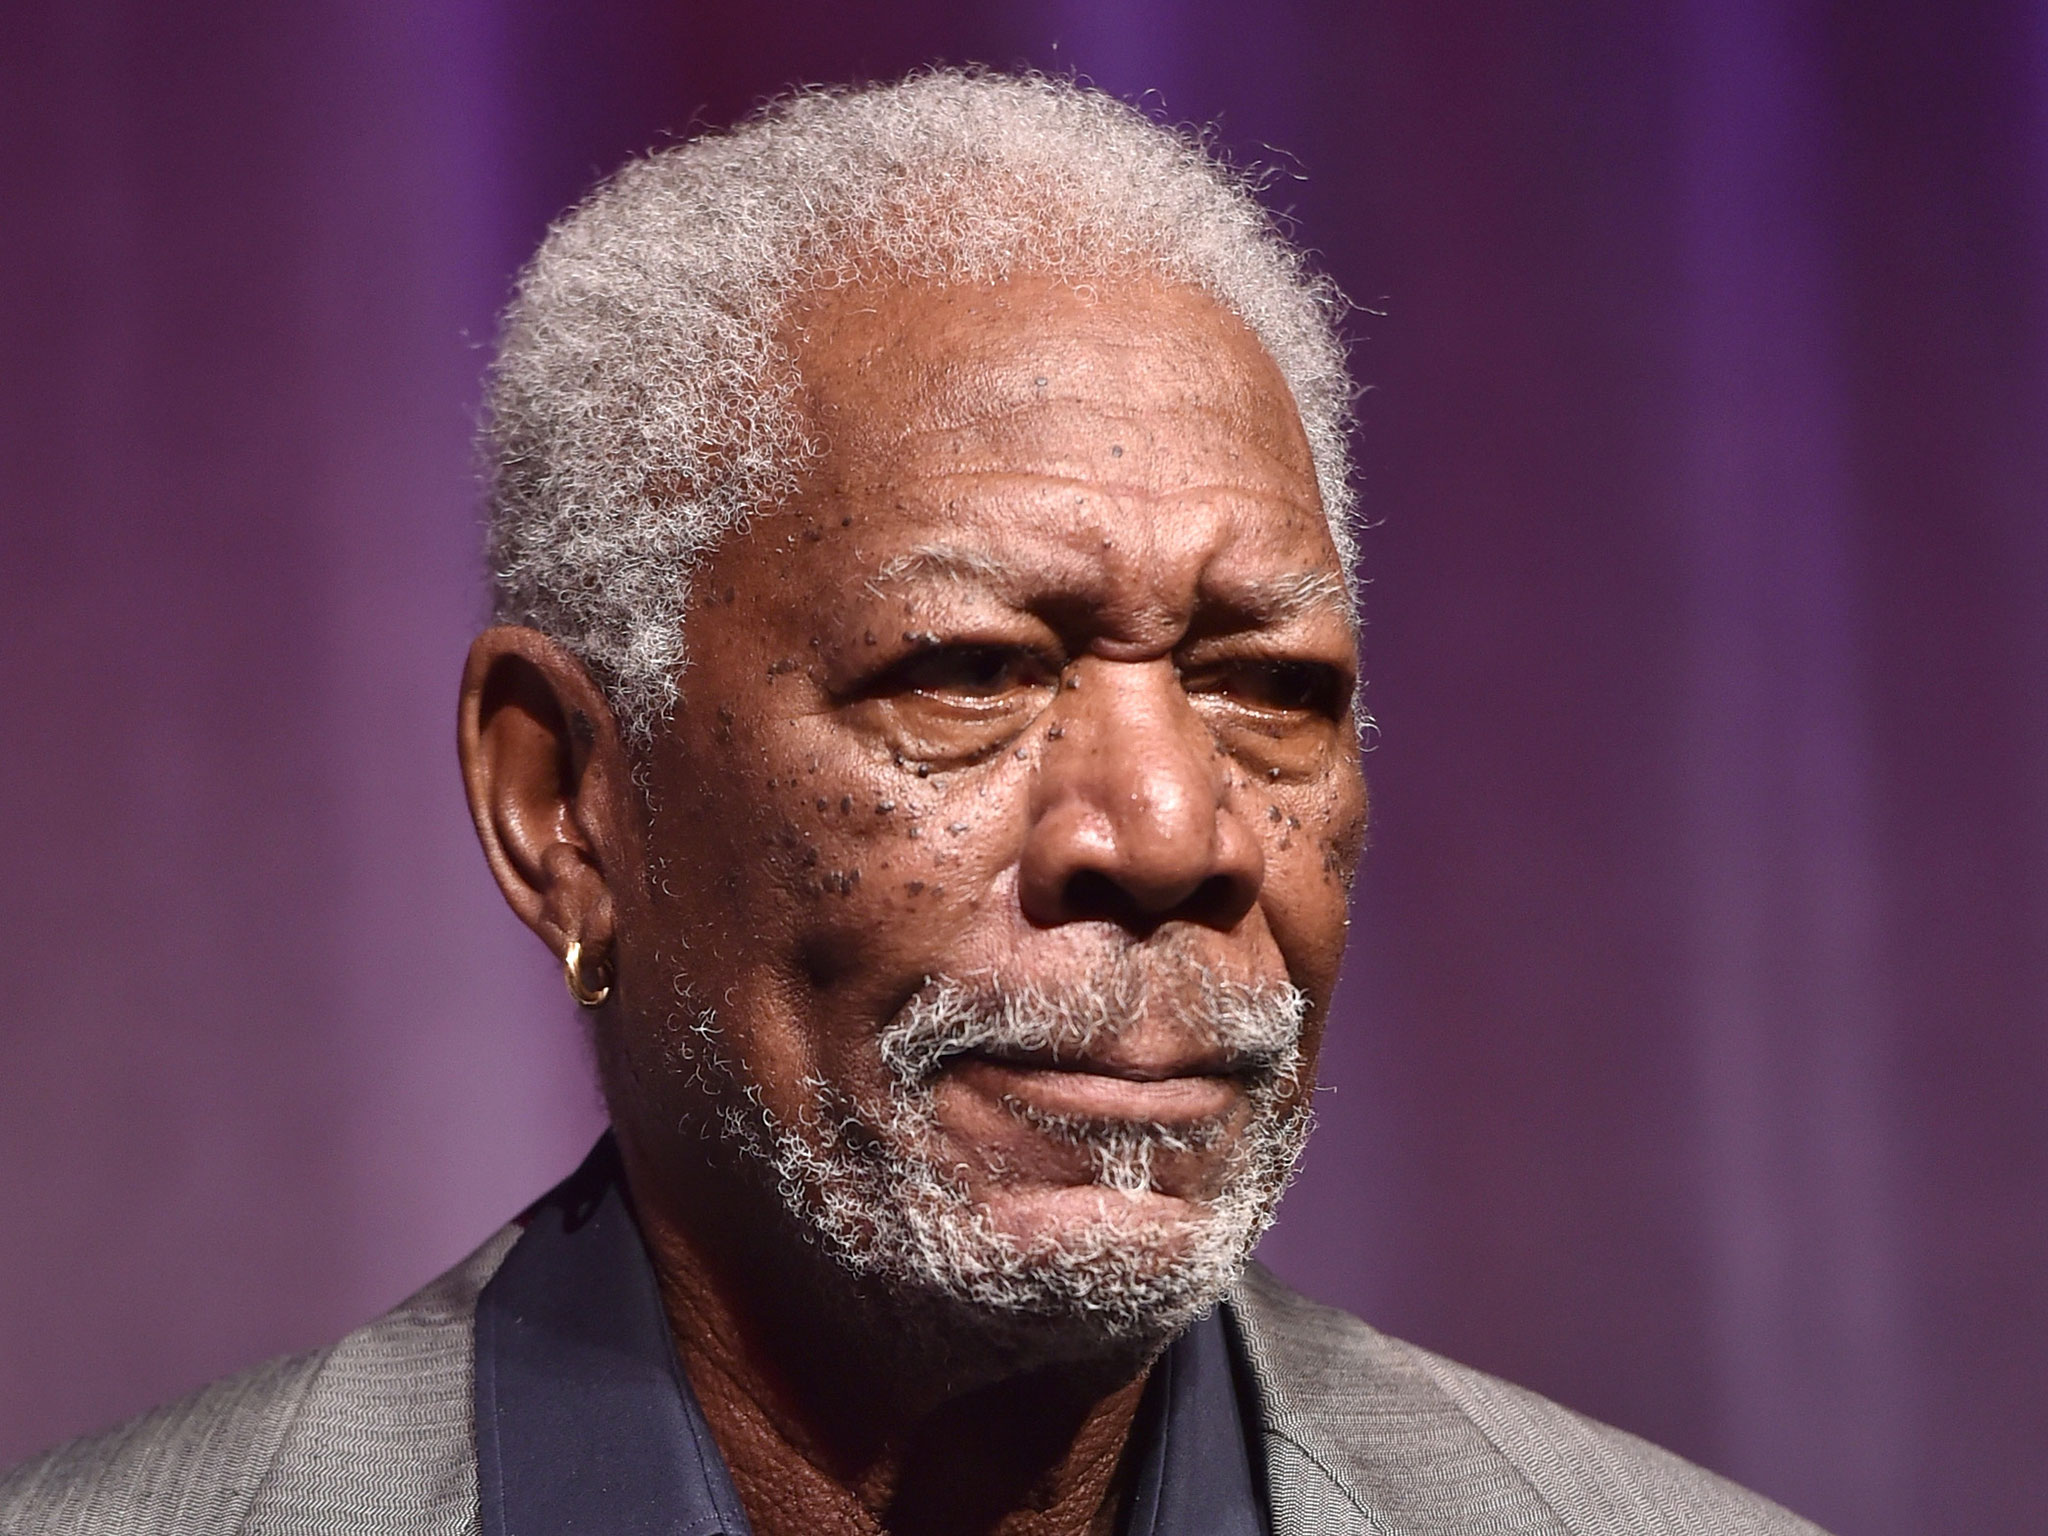 Morgan Freeman on the riot-focused coverage of the Baltimore protests: 'F**k the media' - People - News - The Independent